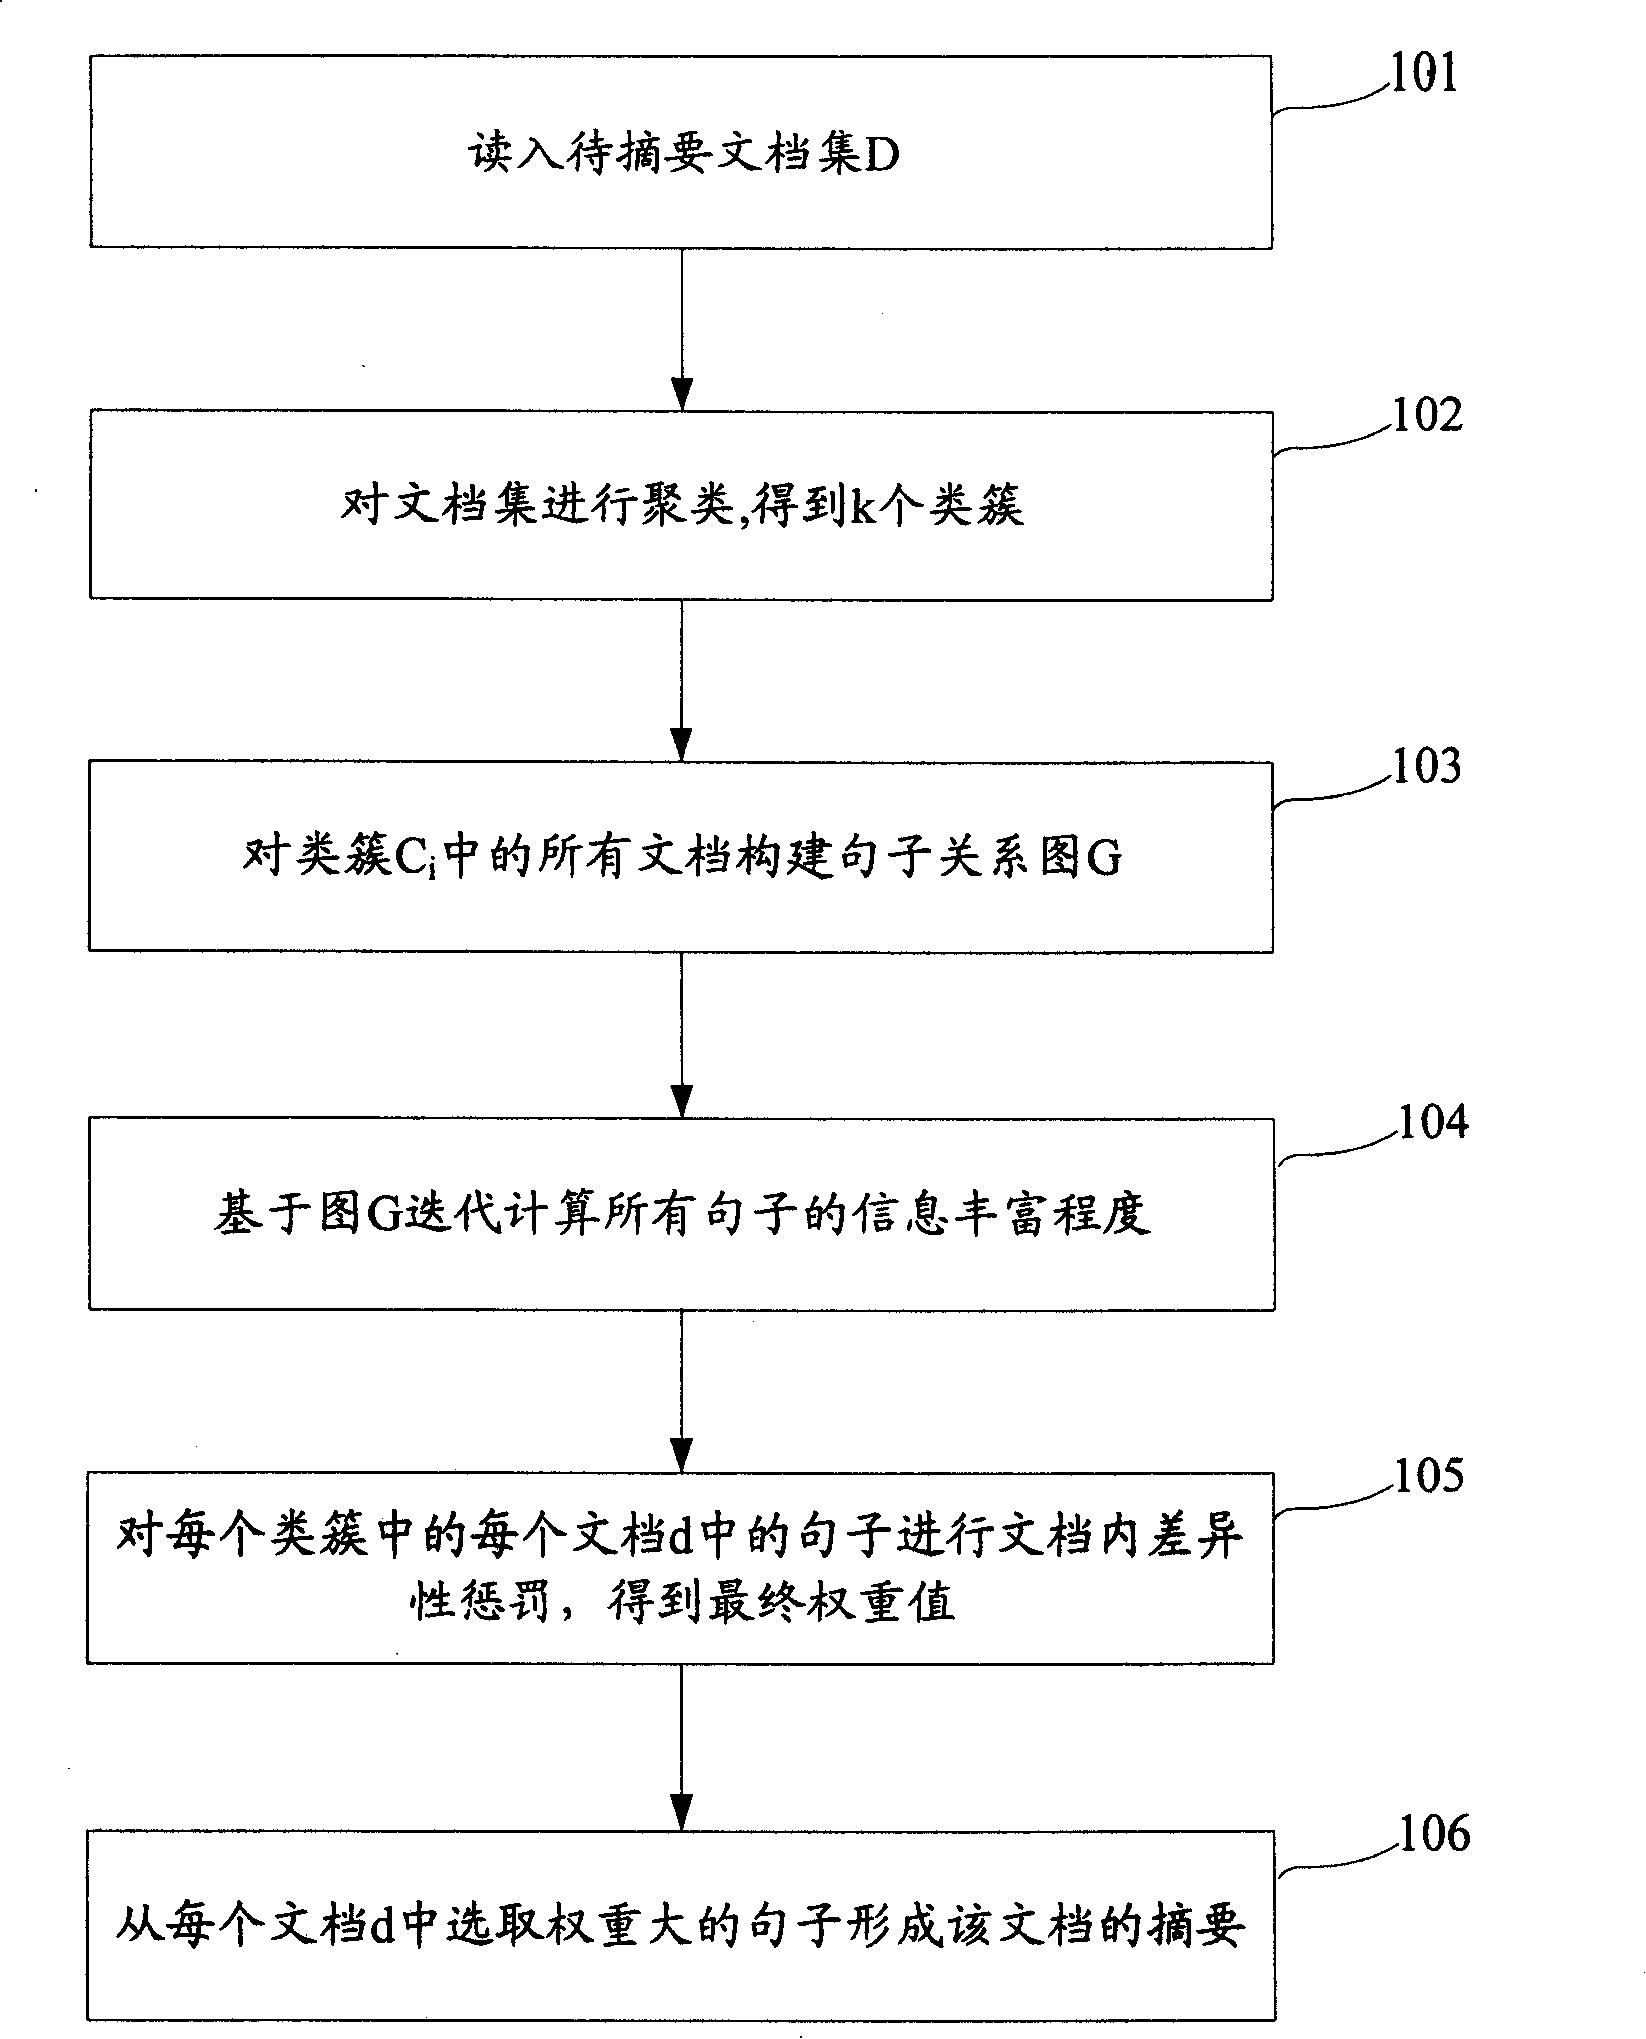 Method and system for abstracting batch single document for document set